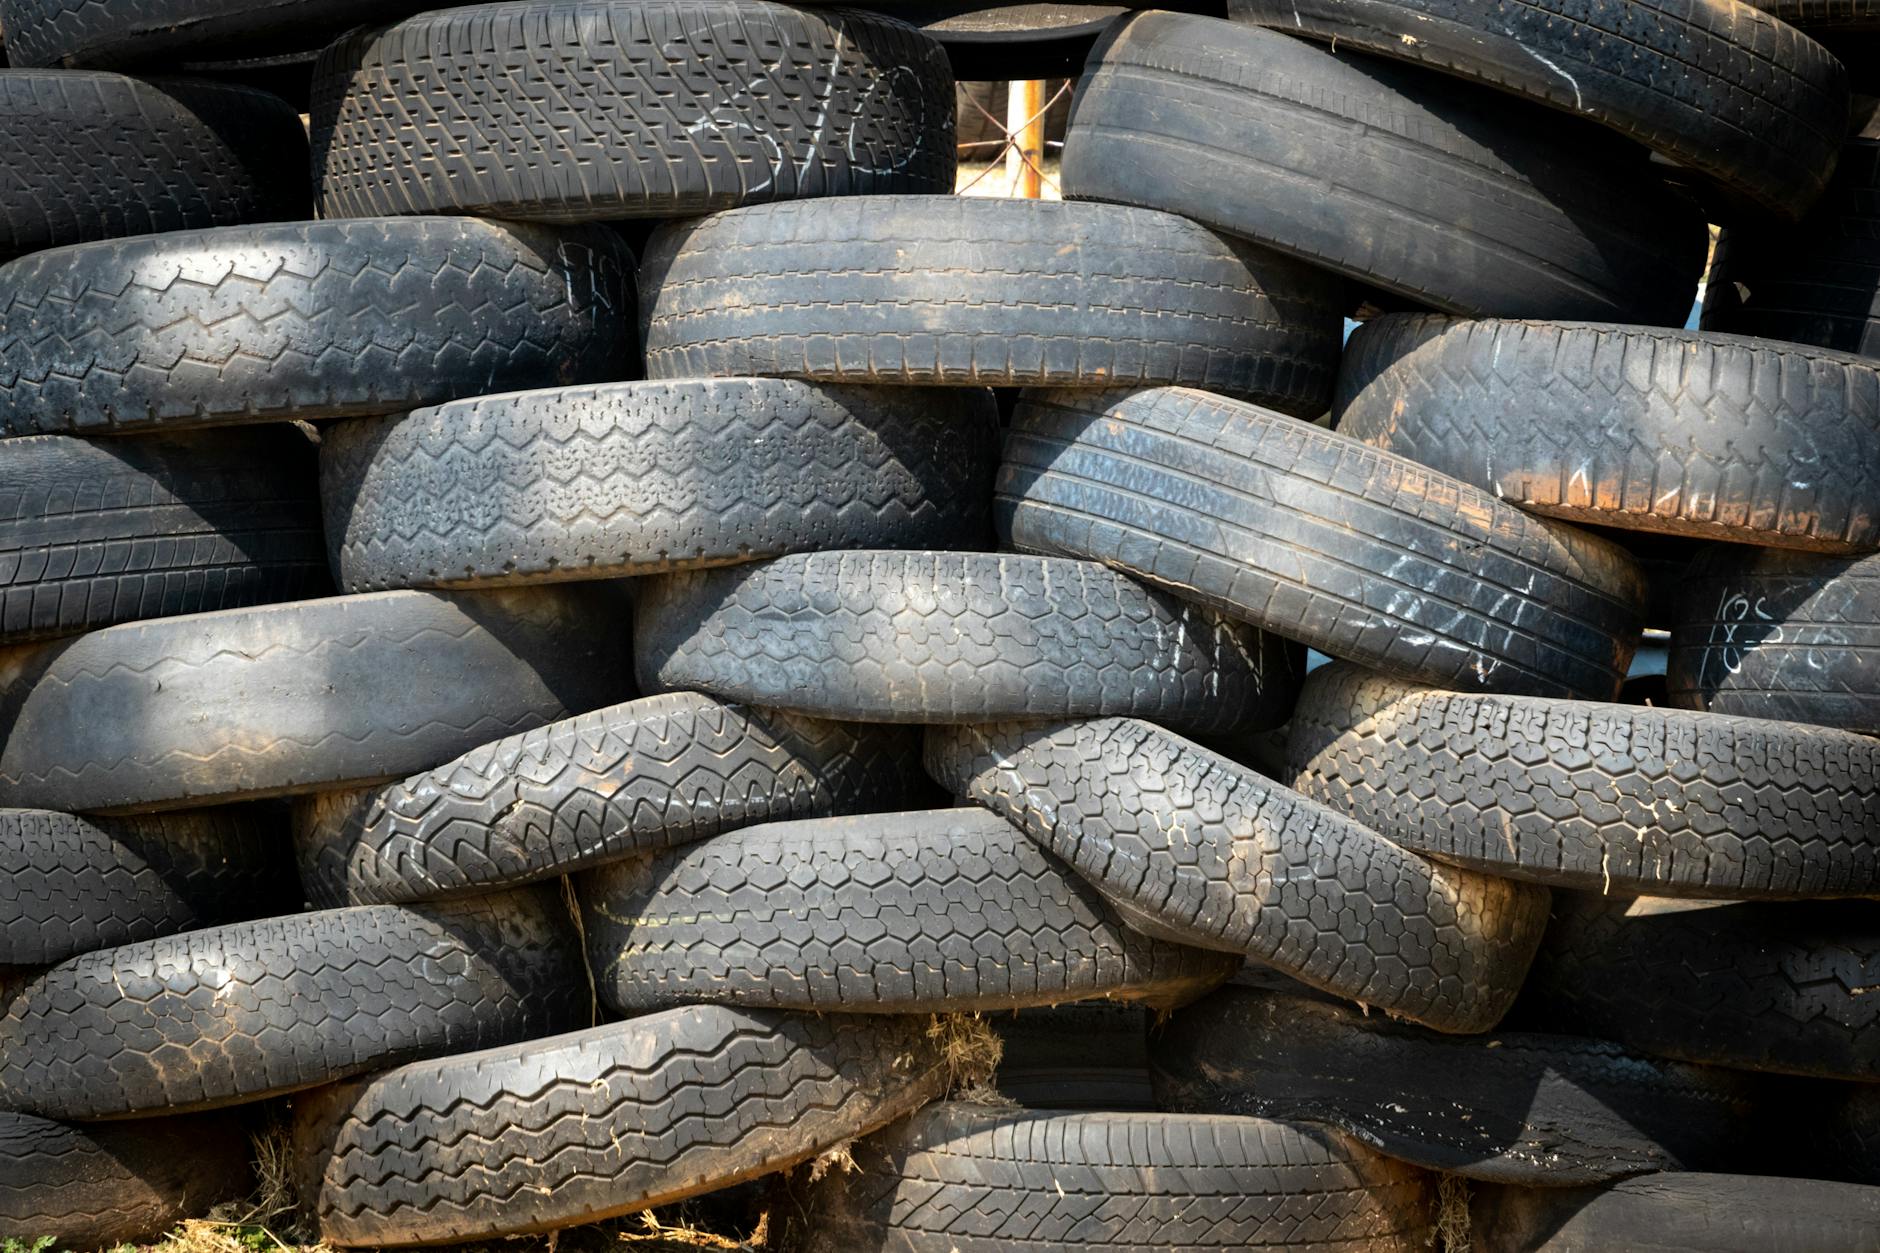 stacked vehicle tire lot mosquitoes